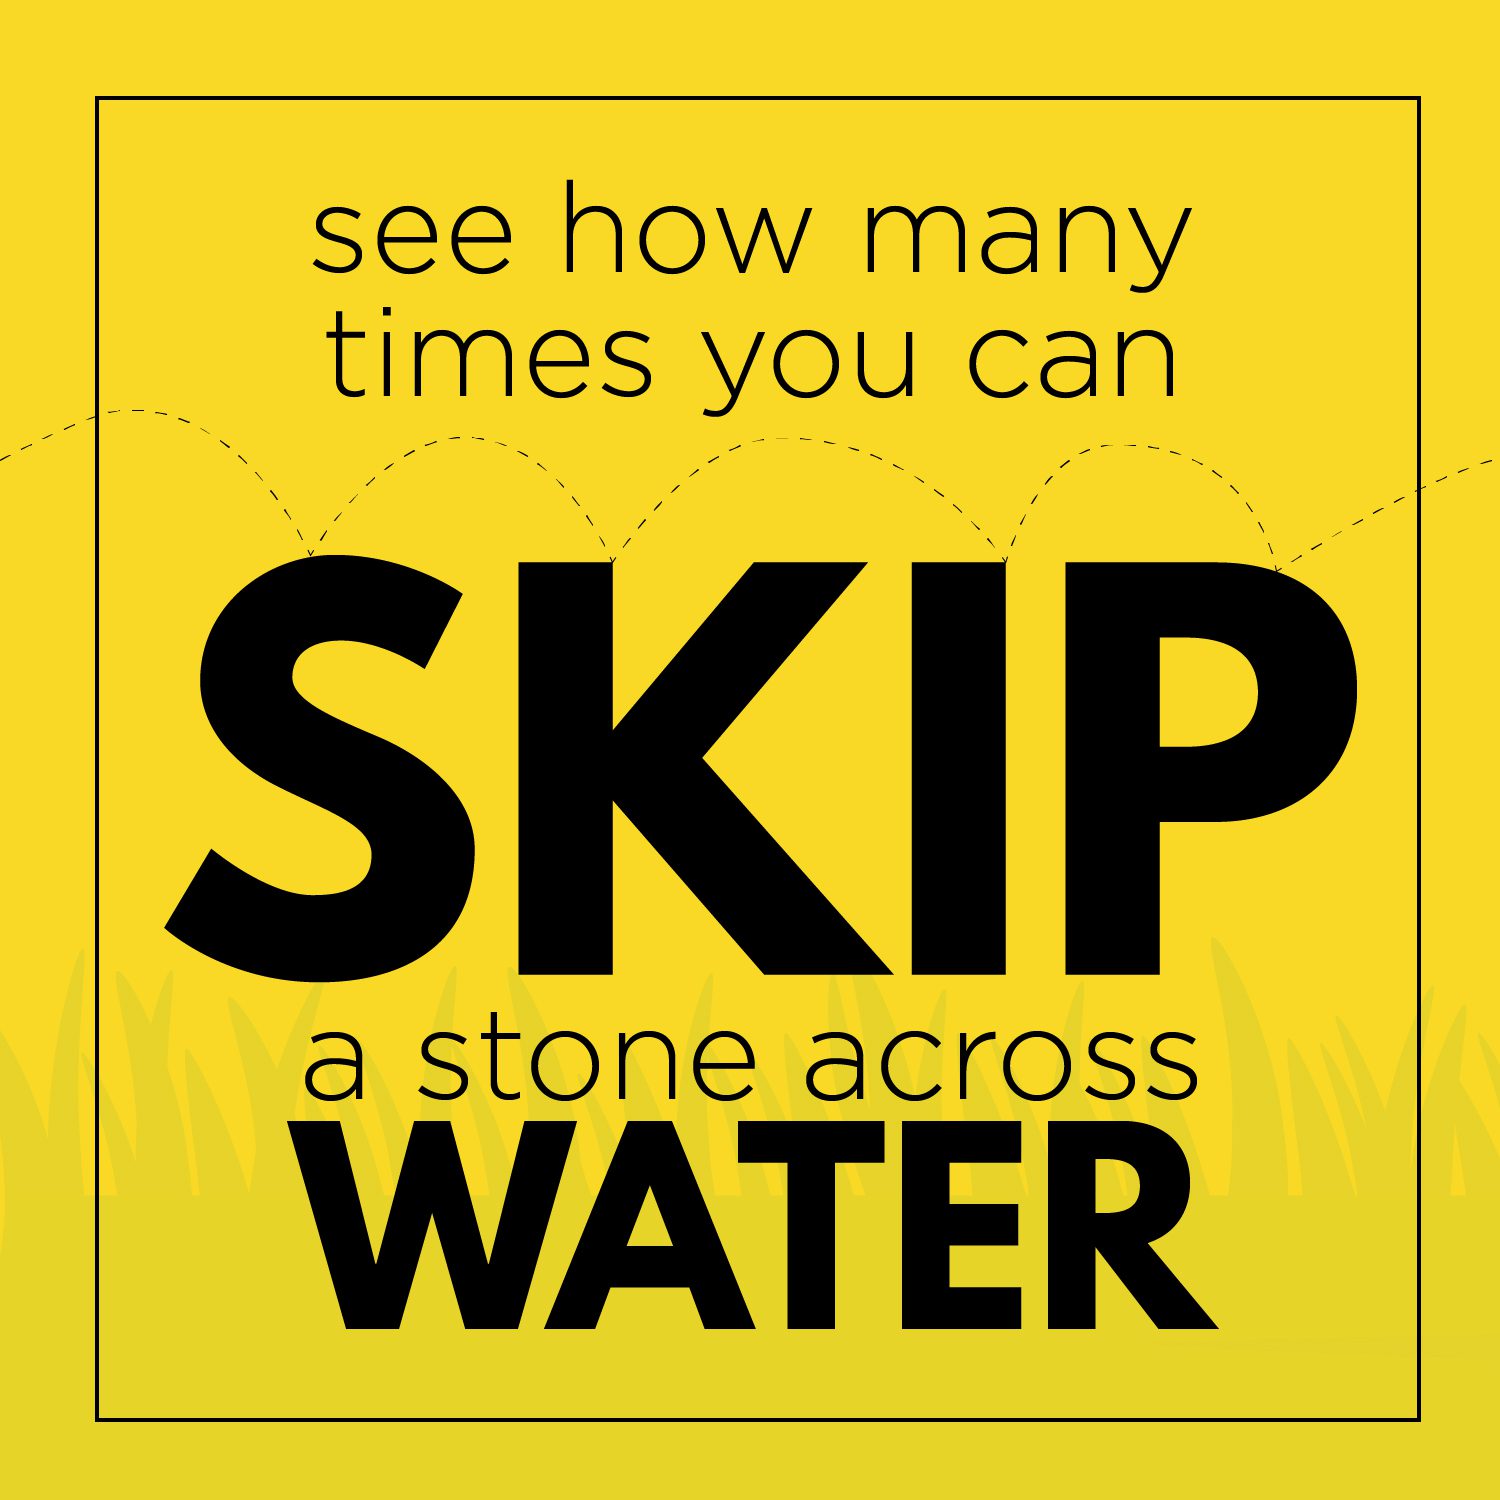 See how many times you can skip a stone across water